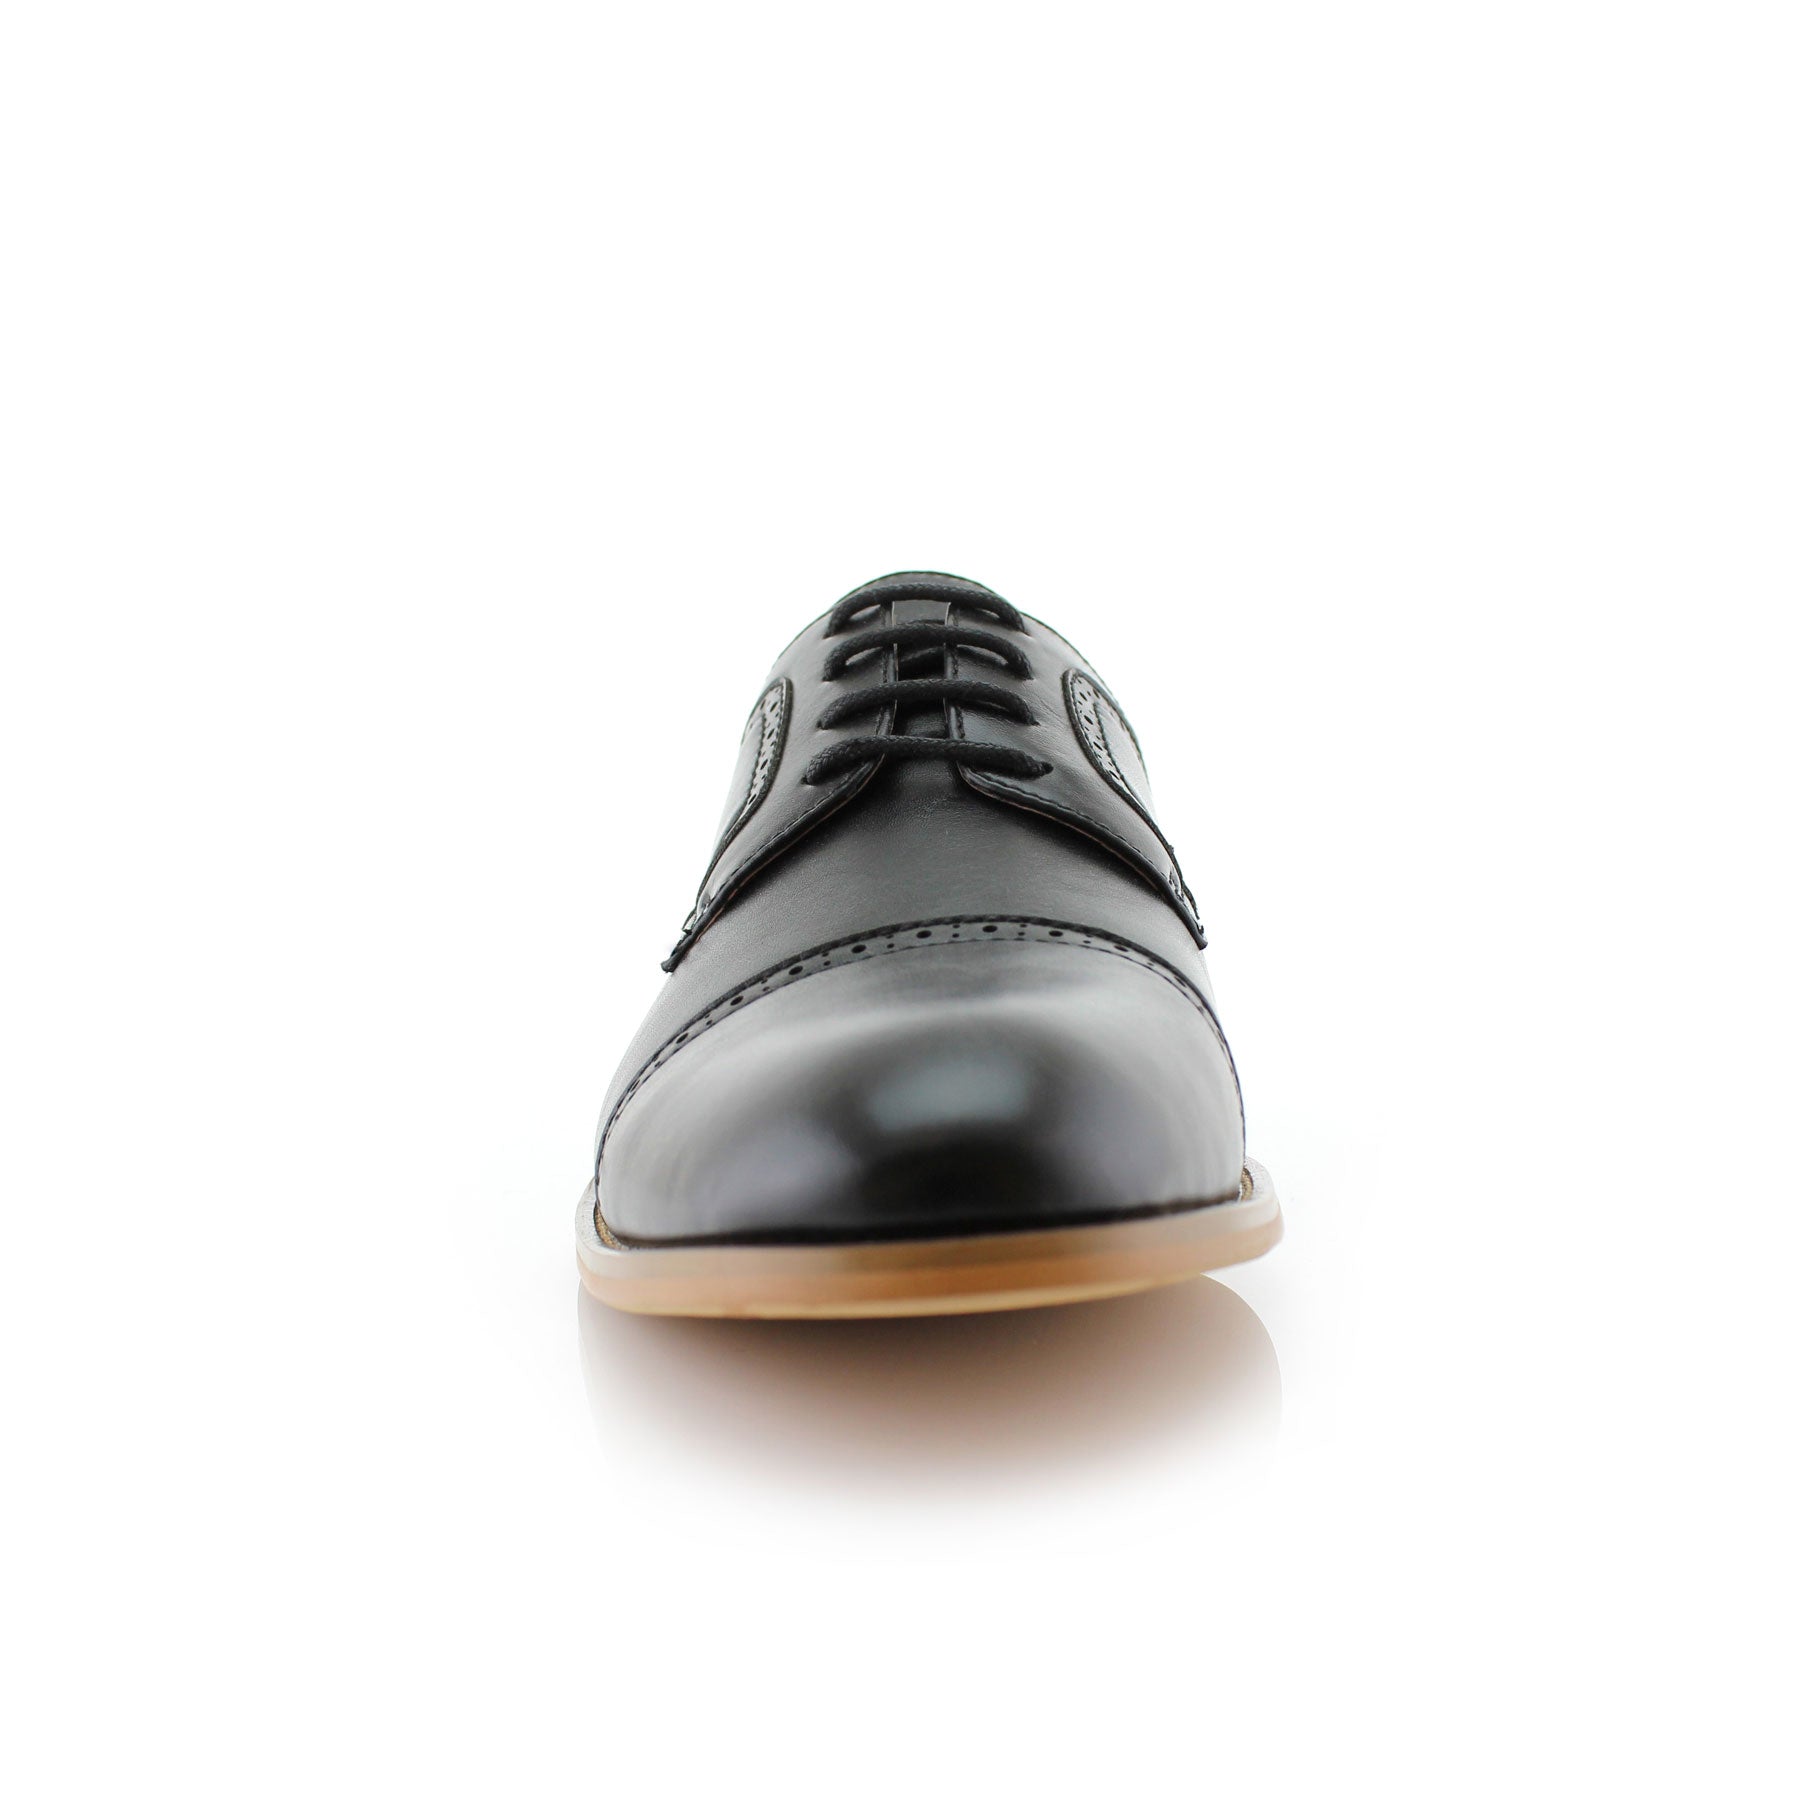 Brogue Burnished Derby Shoes | Jared by Ferro Aldo | Conal Footwear | Front Angle View